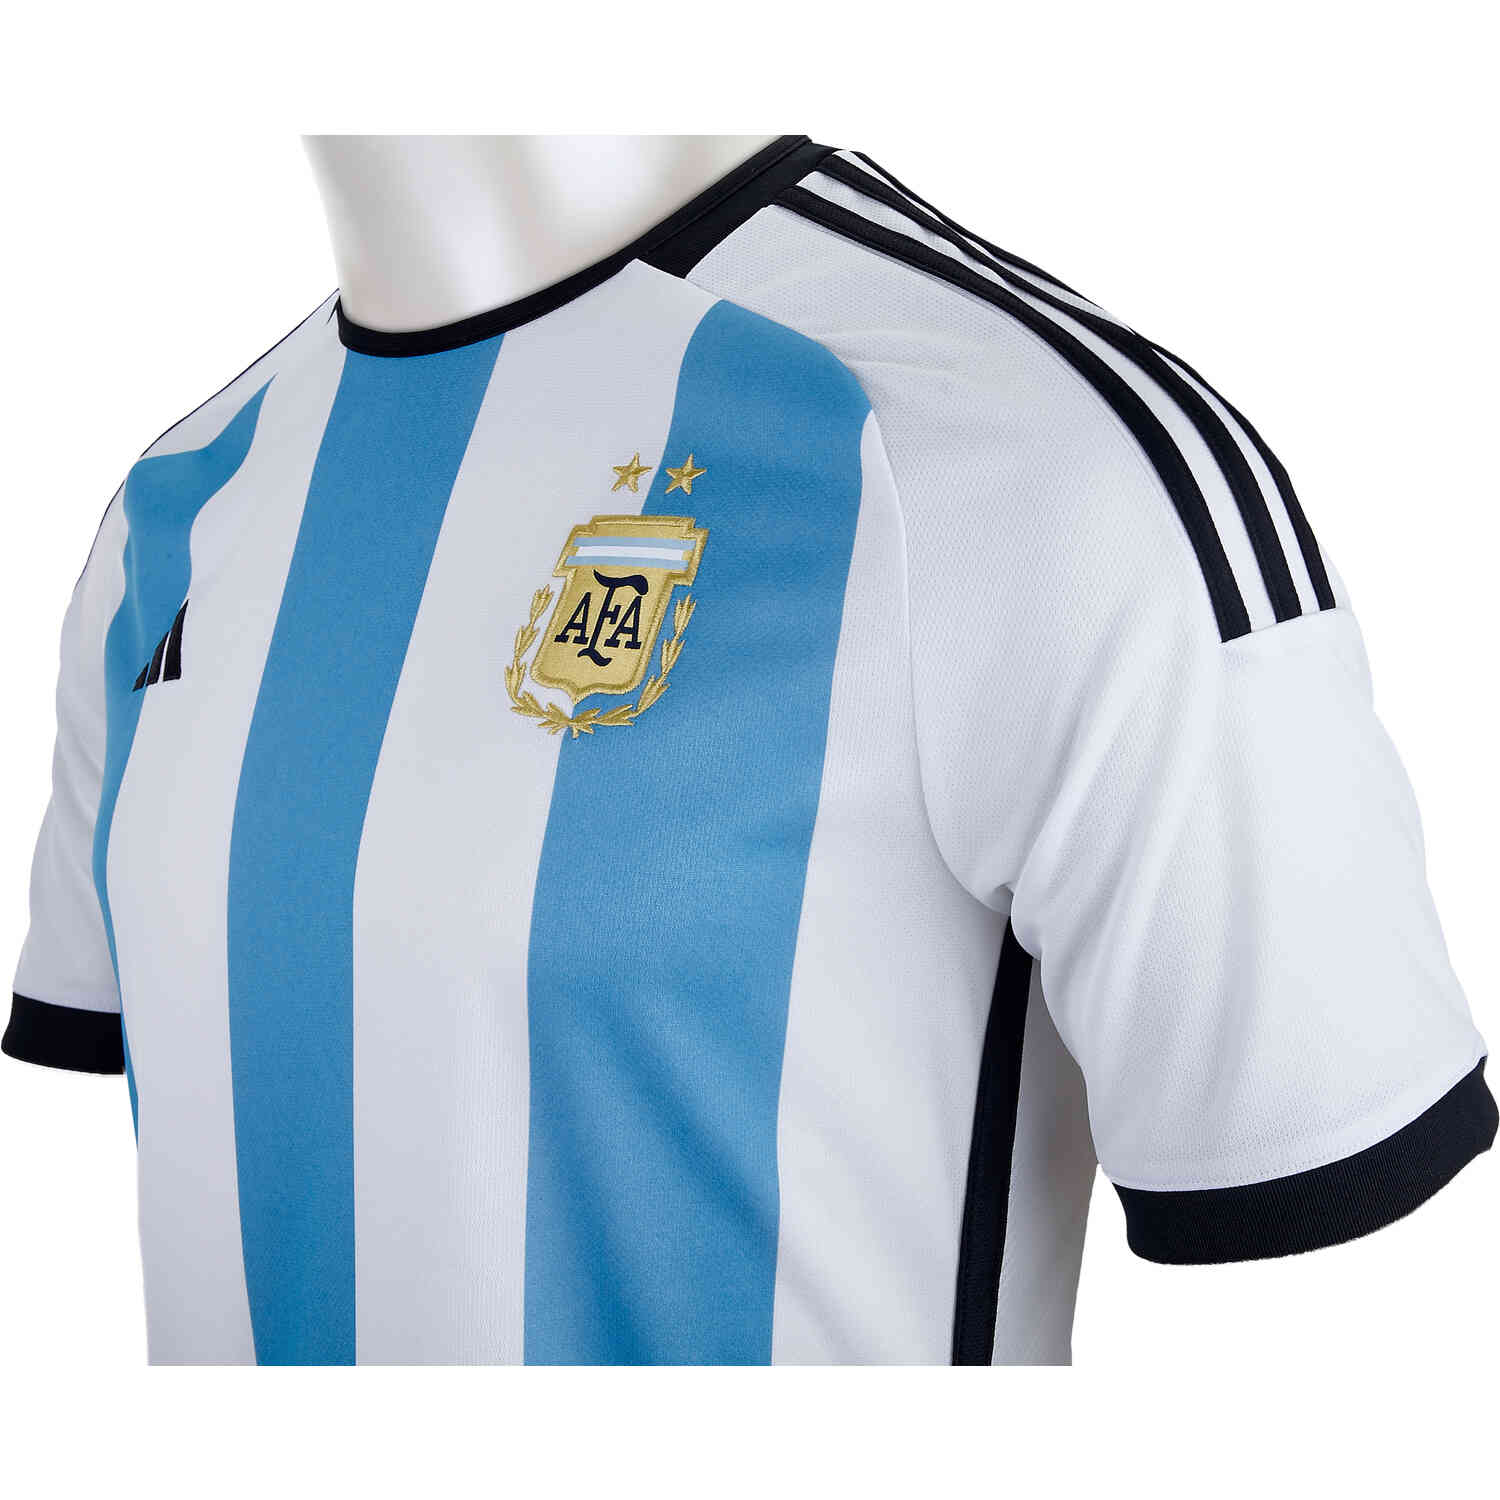 adidas Launch Argentina 2022 Home Shirt - SoccerBible